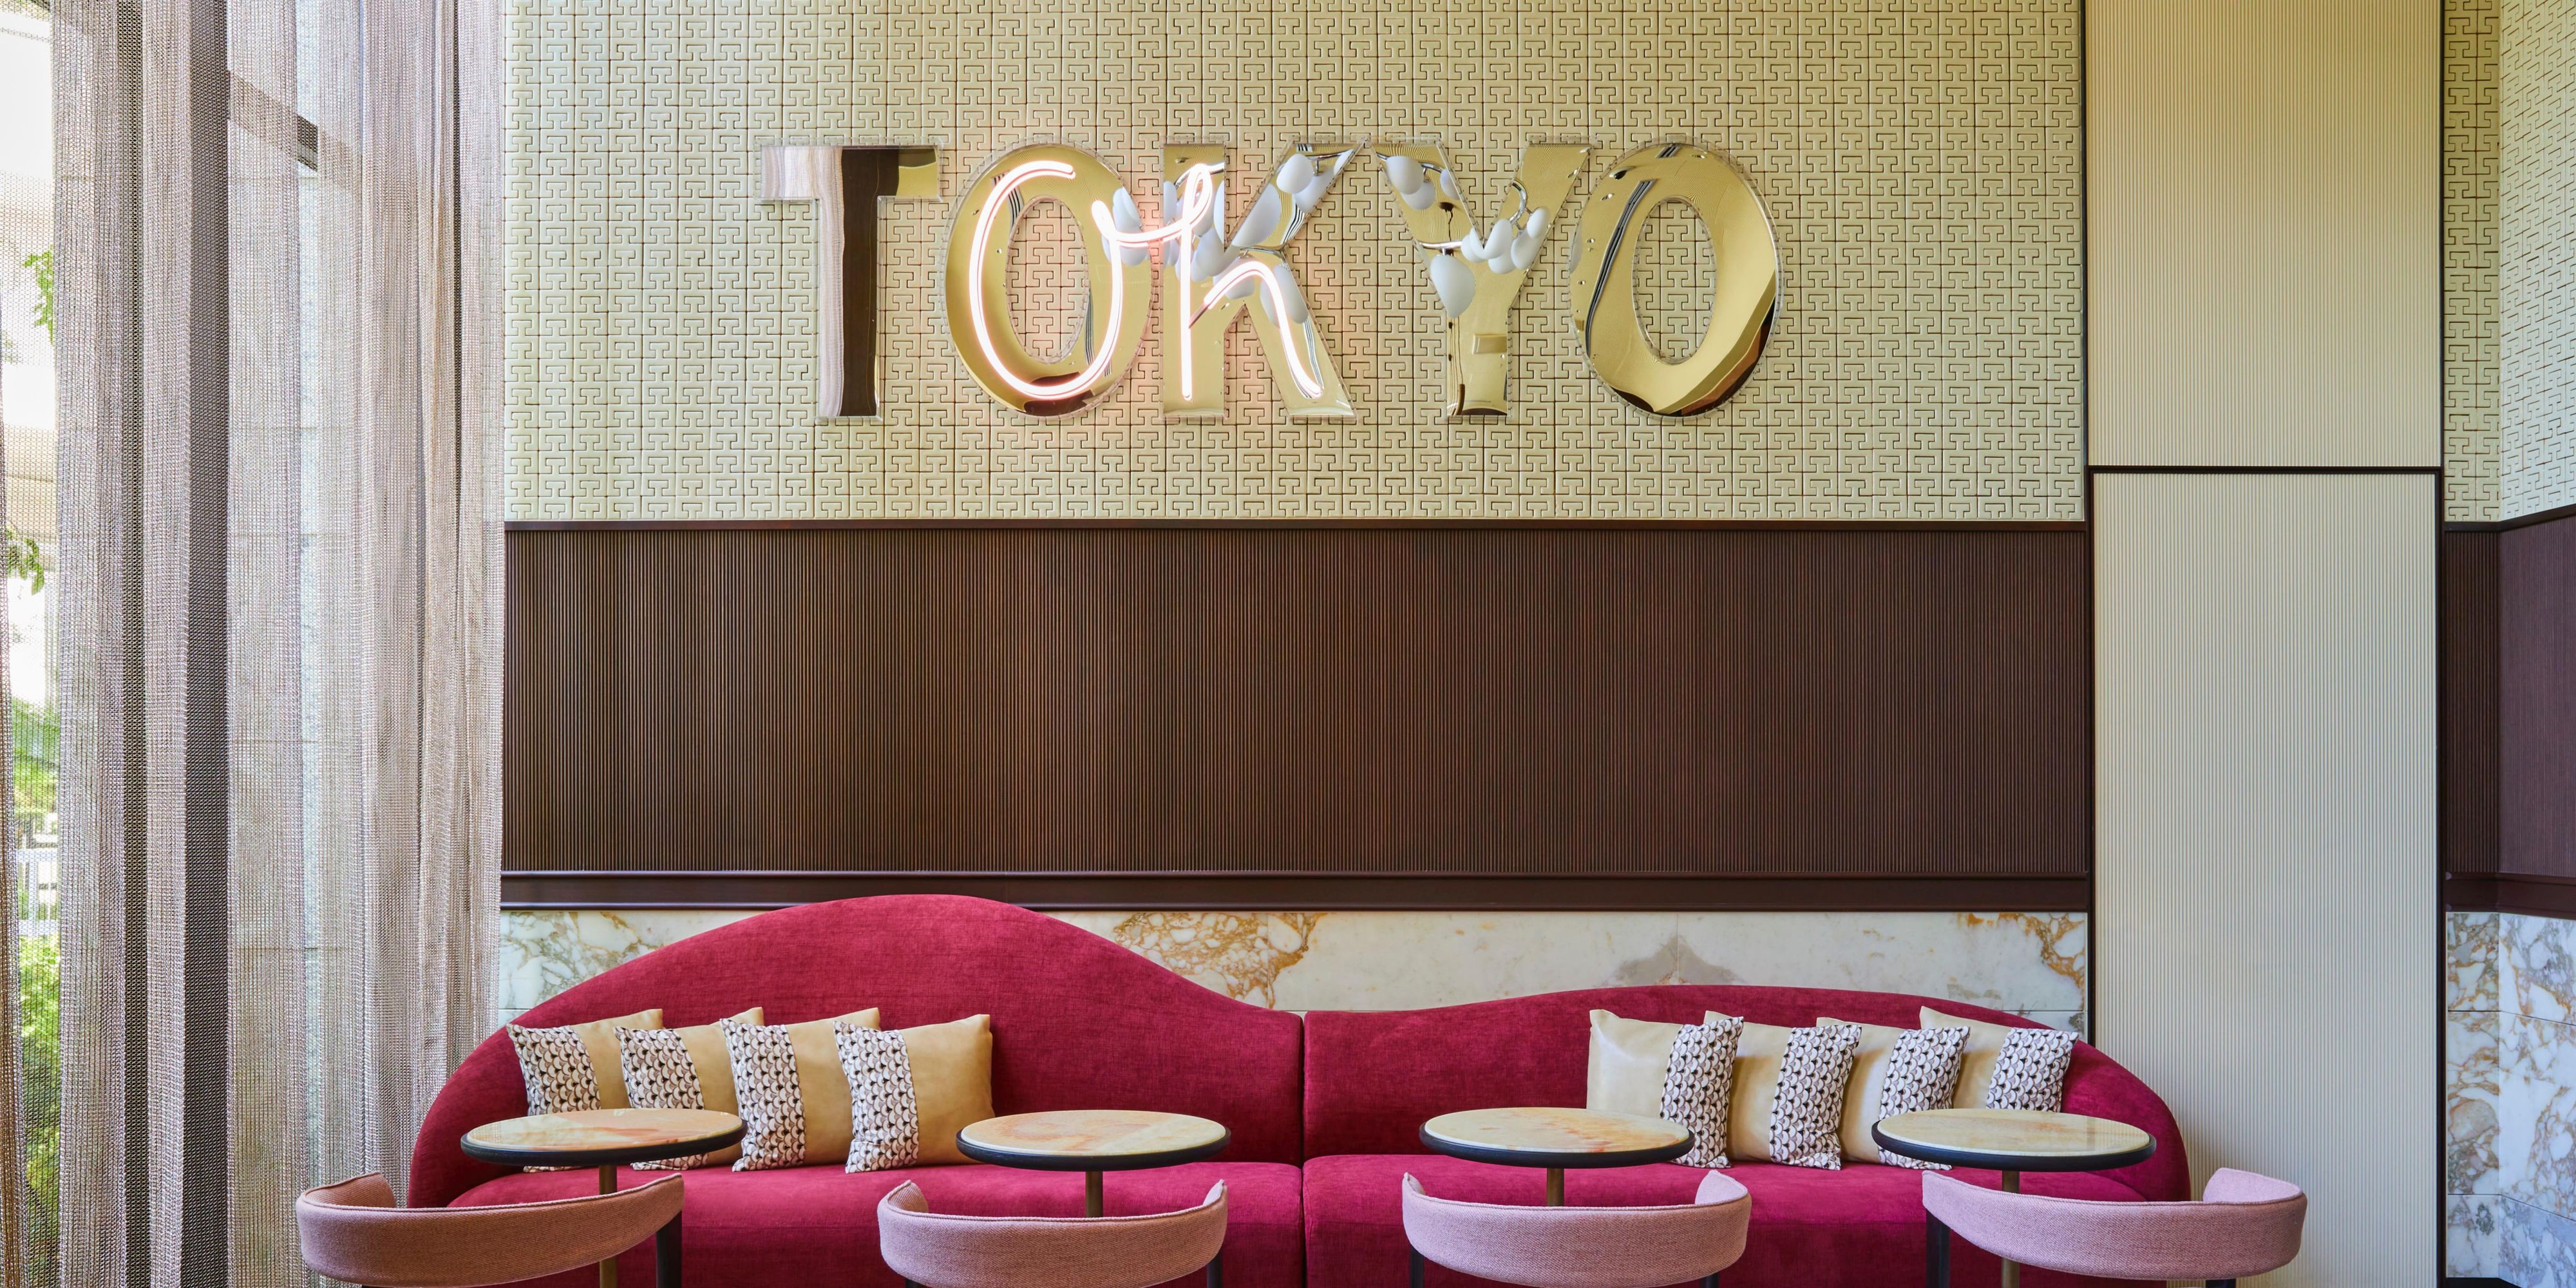 Find the ironic neon ‘Oh Tokyo’ sign at The Jones Café | Bar!